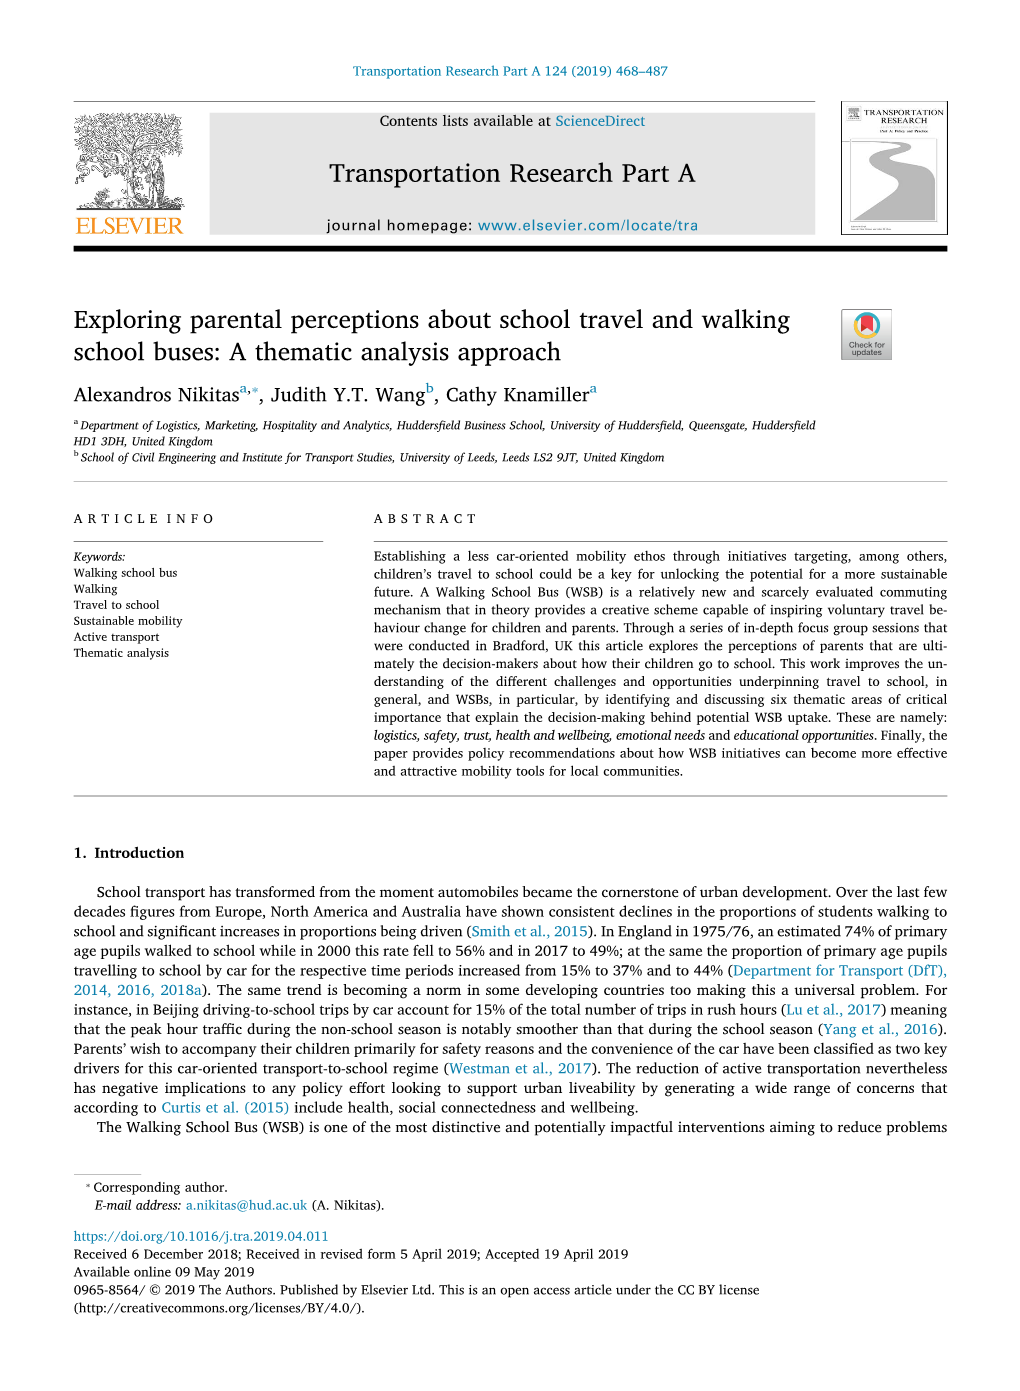 Exploring Parental Perceptions About School Travel and Walking School Buses: a Thematic Analysis Approach T ⁎ Alexandros Nikitasa, , Judith Y.T